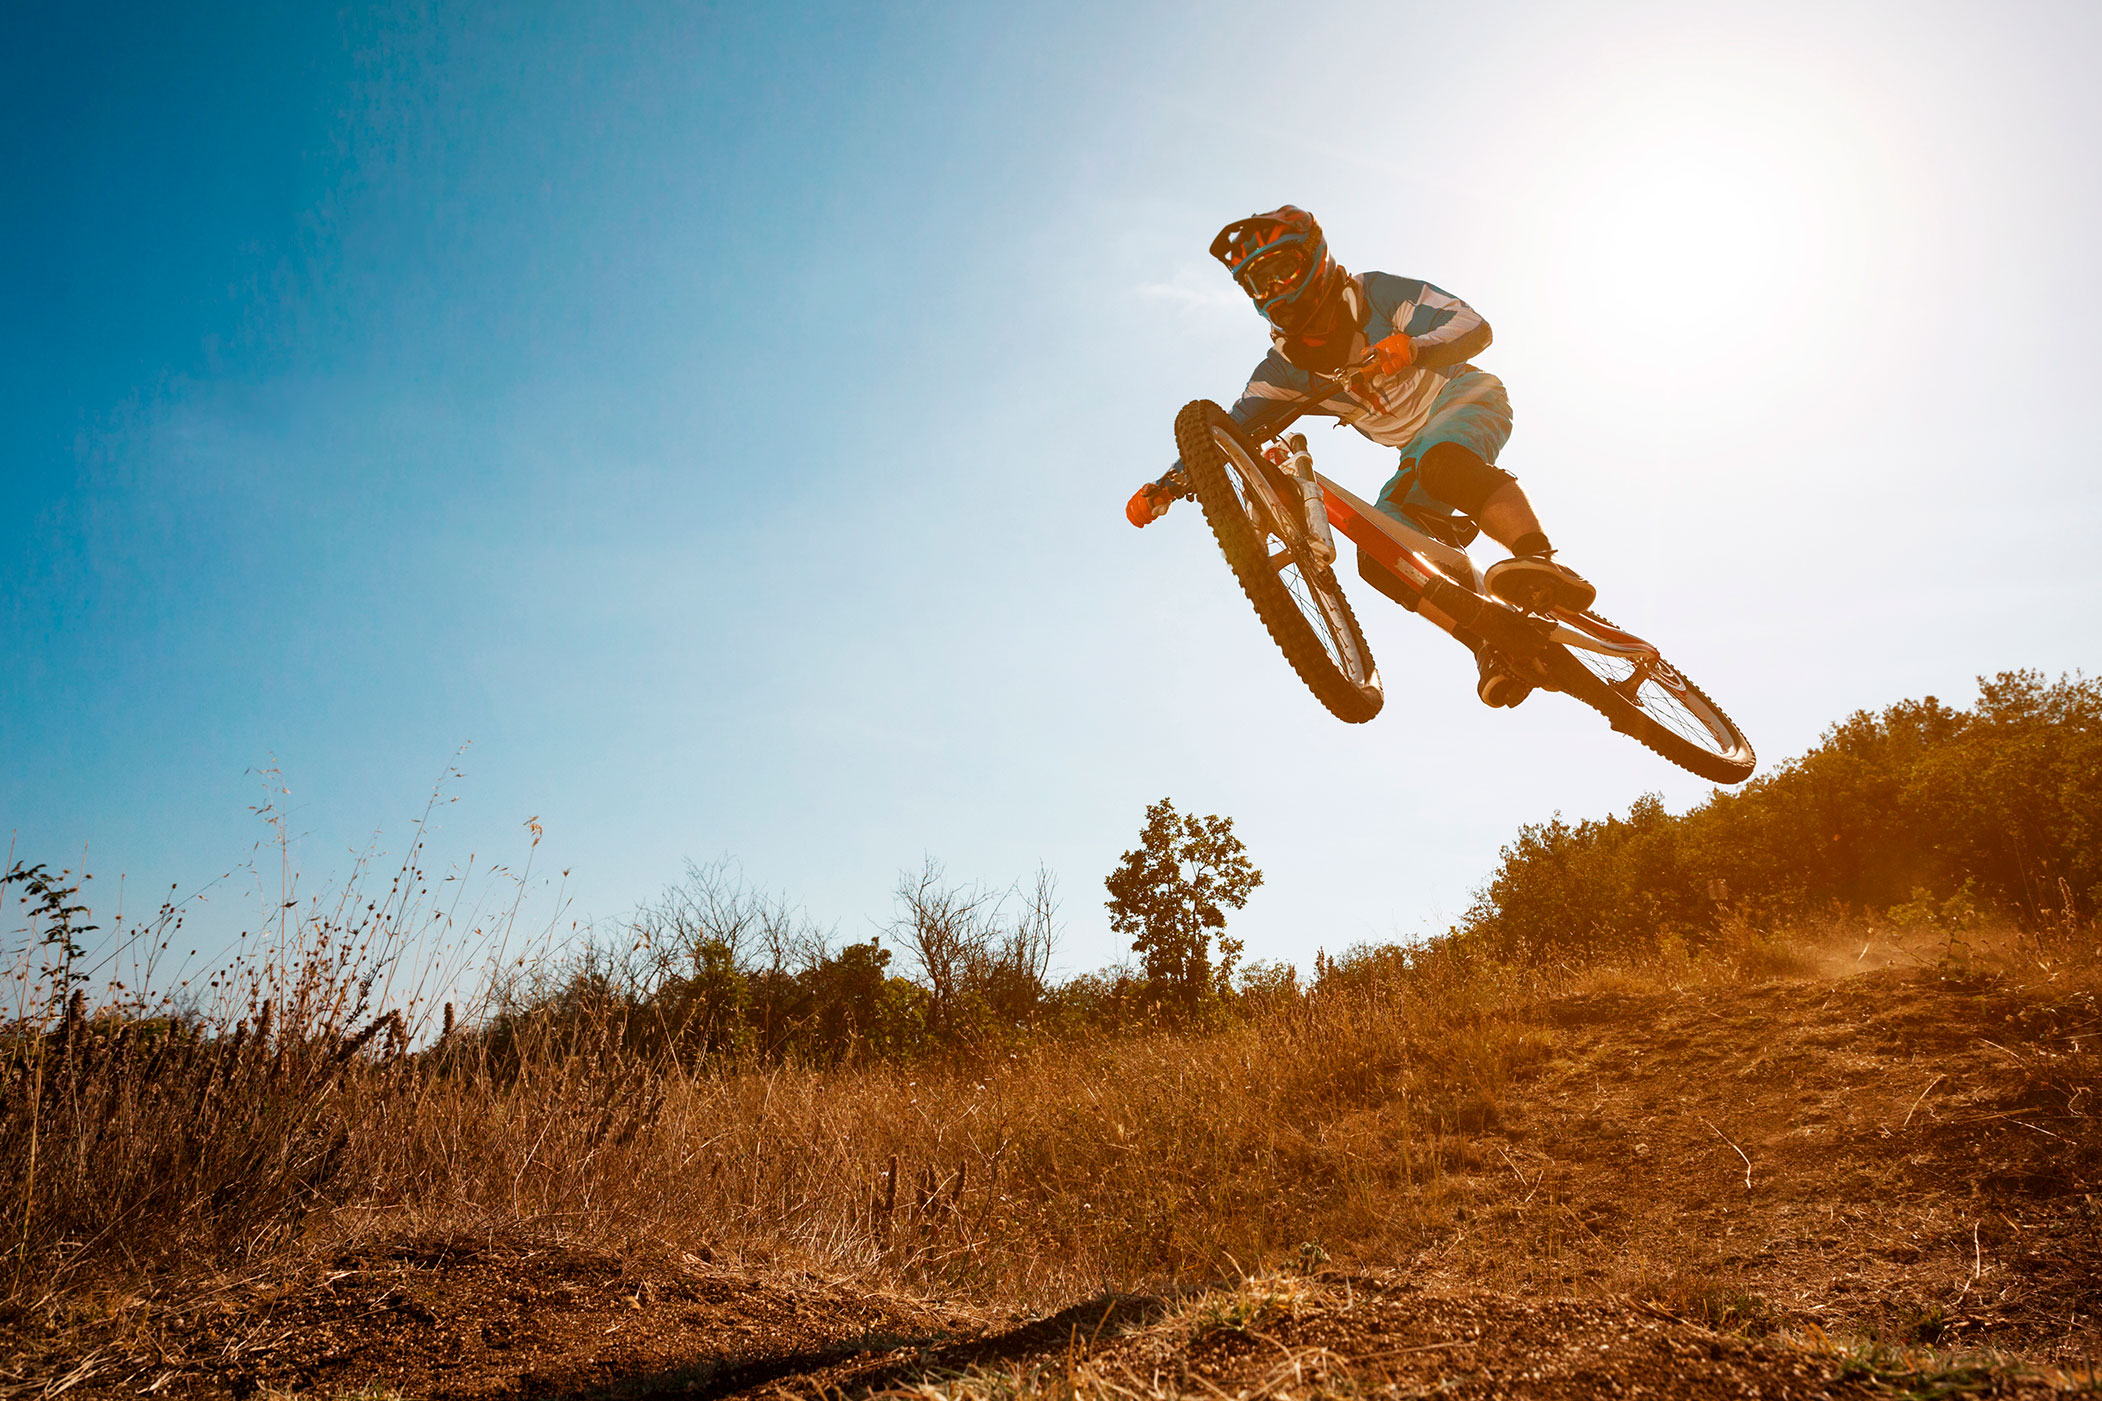 Branding your Products in the Action and Adventure Sports Market